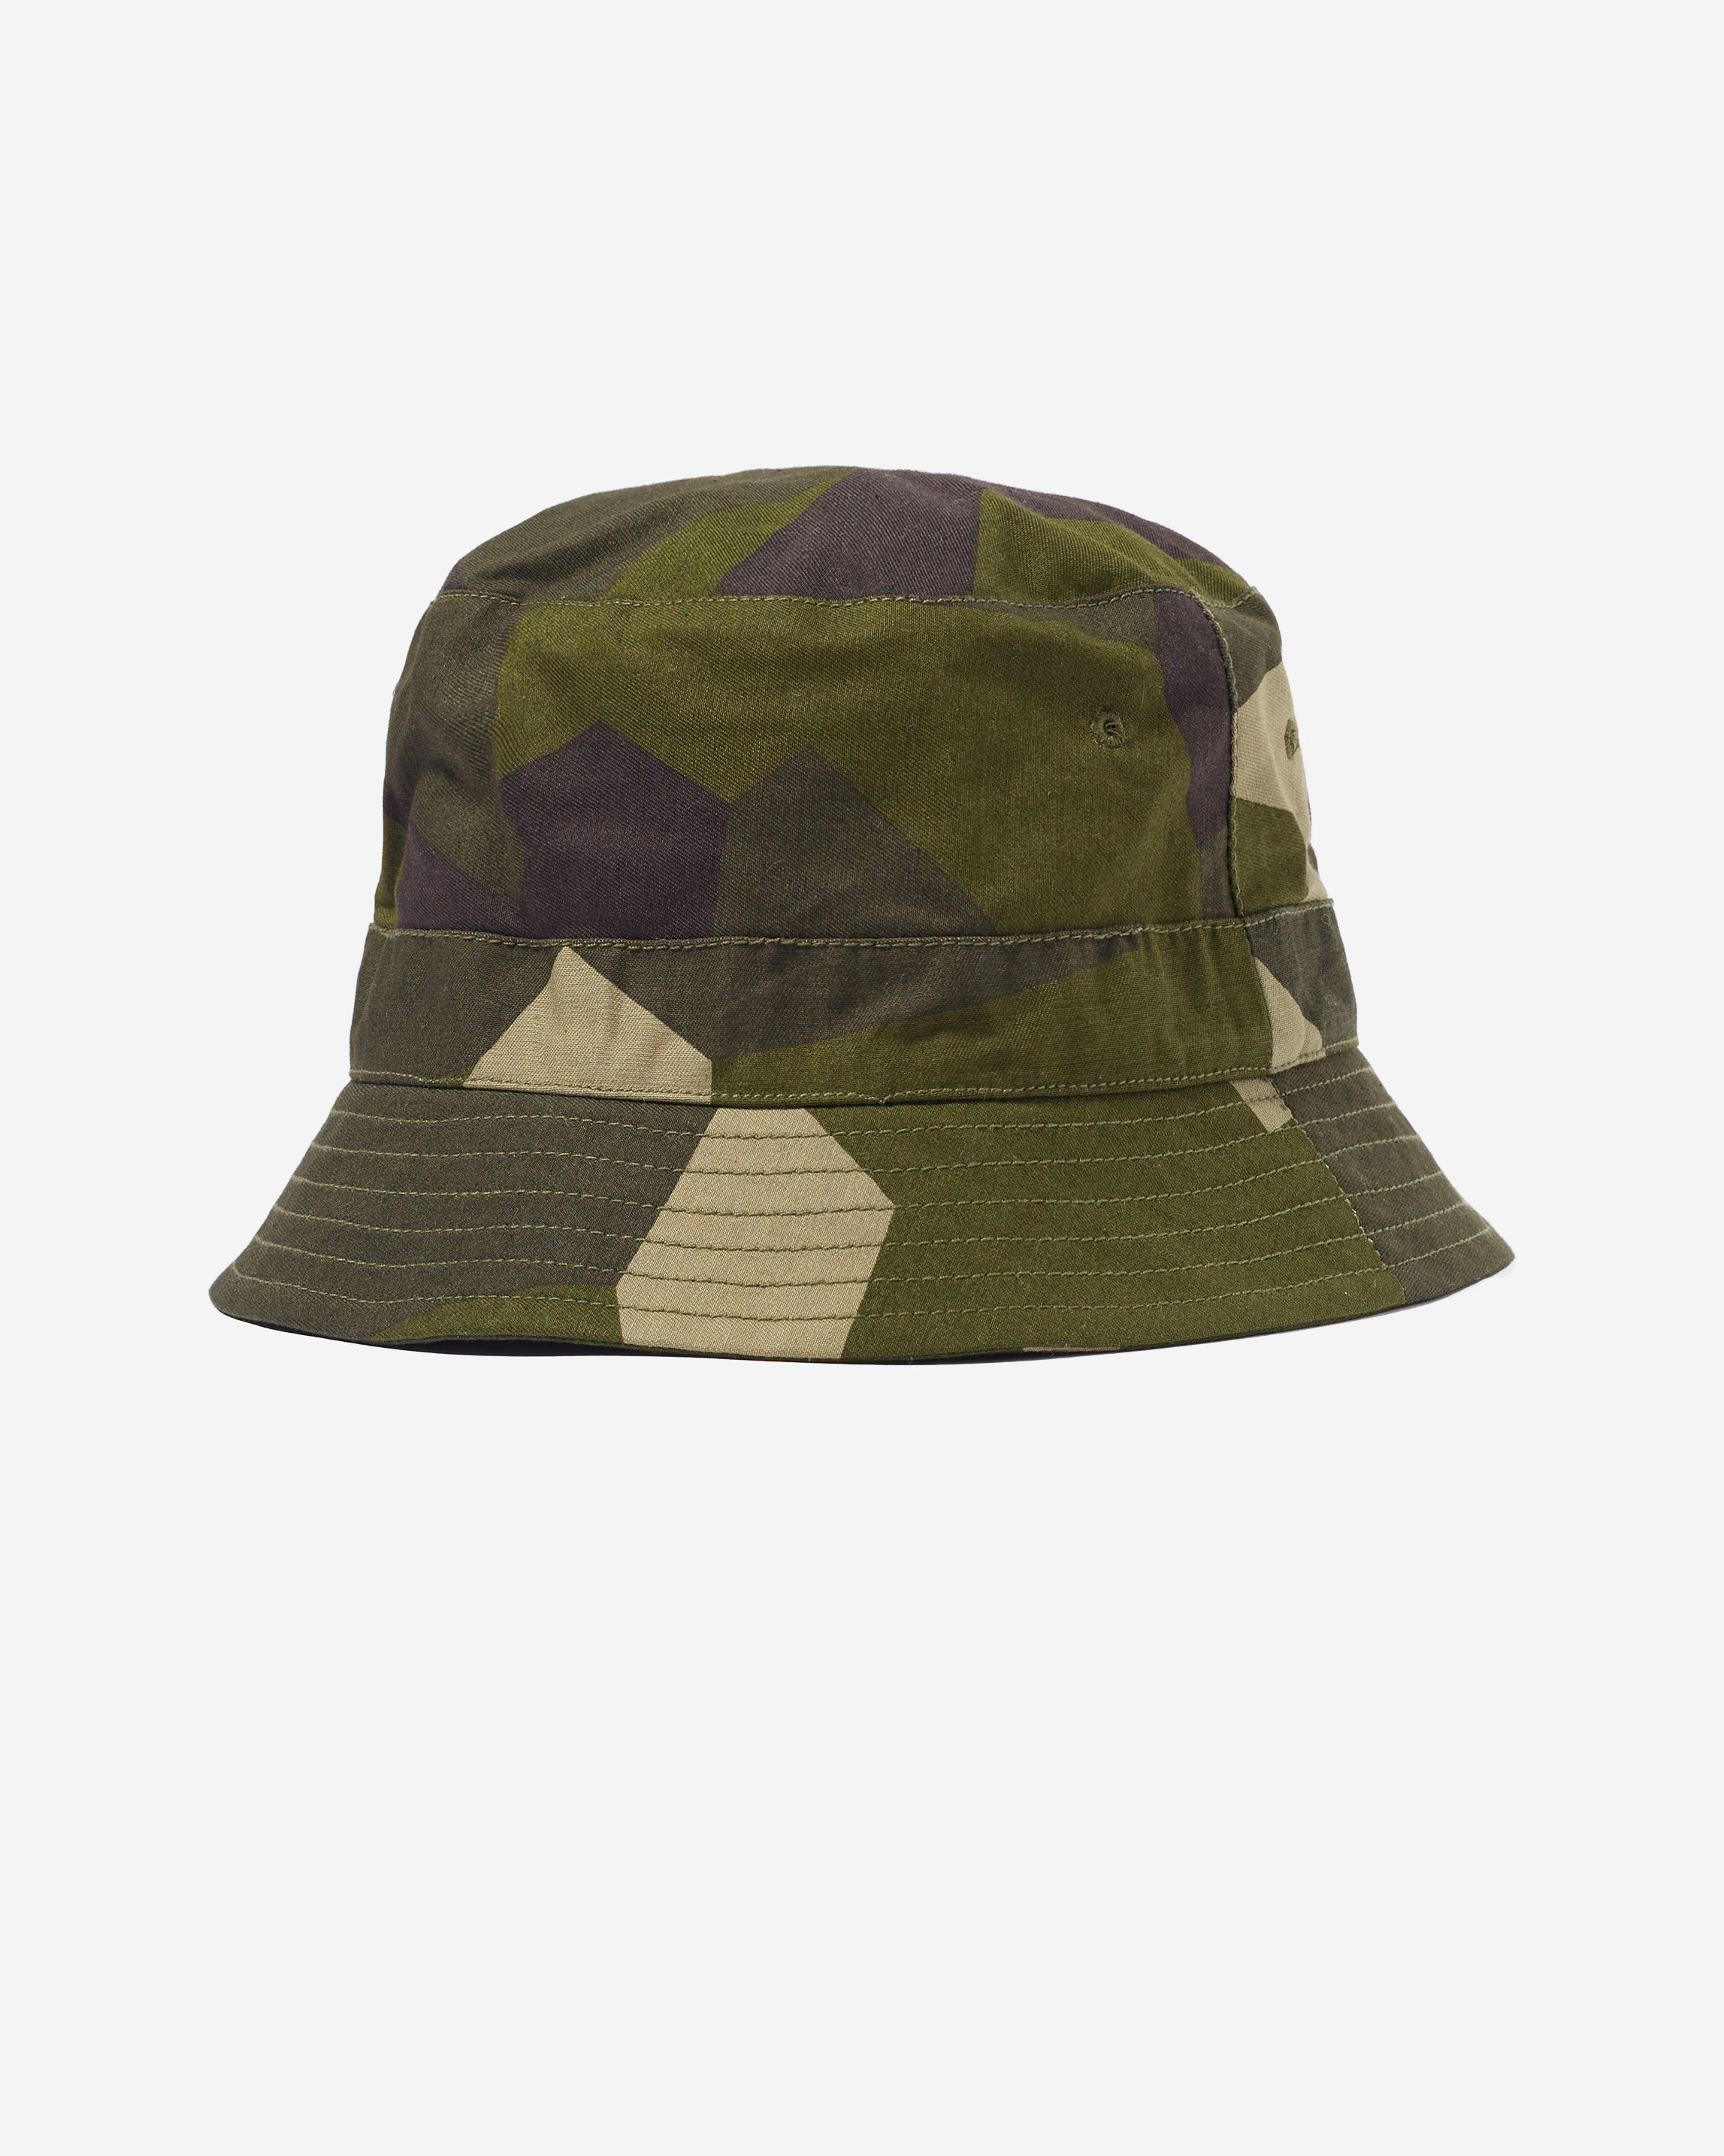 Originally worn by fishermen and farmers alike for protection against the elements, the Universal Works 'Bucket Hat' is back for another season. This is an ode to the fact that, rather than a facsimile of the OG Swedish Army Camo, our version is made by one of our favorite Japanese mills and pays homage to the original, making it more Shwed-ish than Swedish. 100% cotton with a mid-weight 250g plain weave finish, for a long-lasting durable cloth.